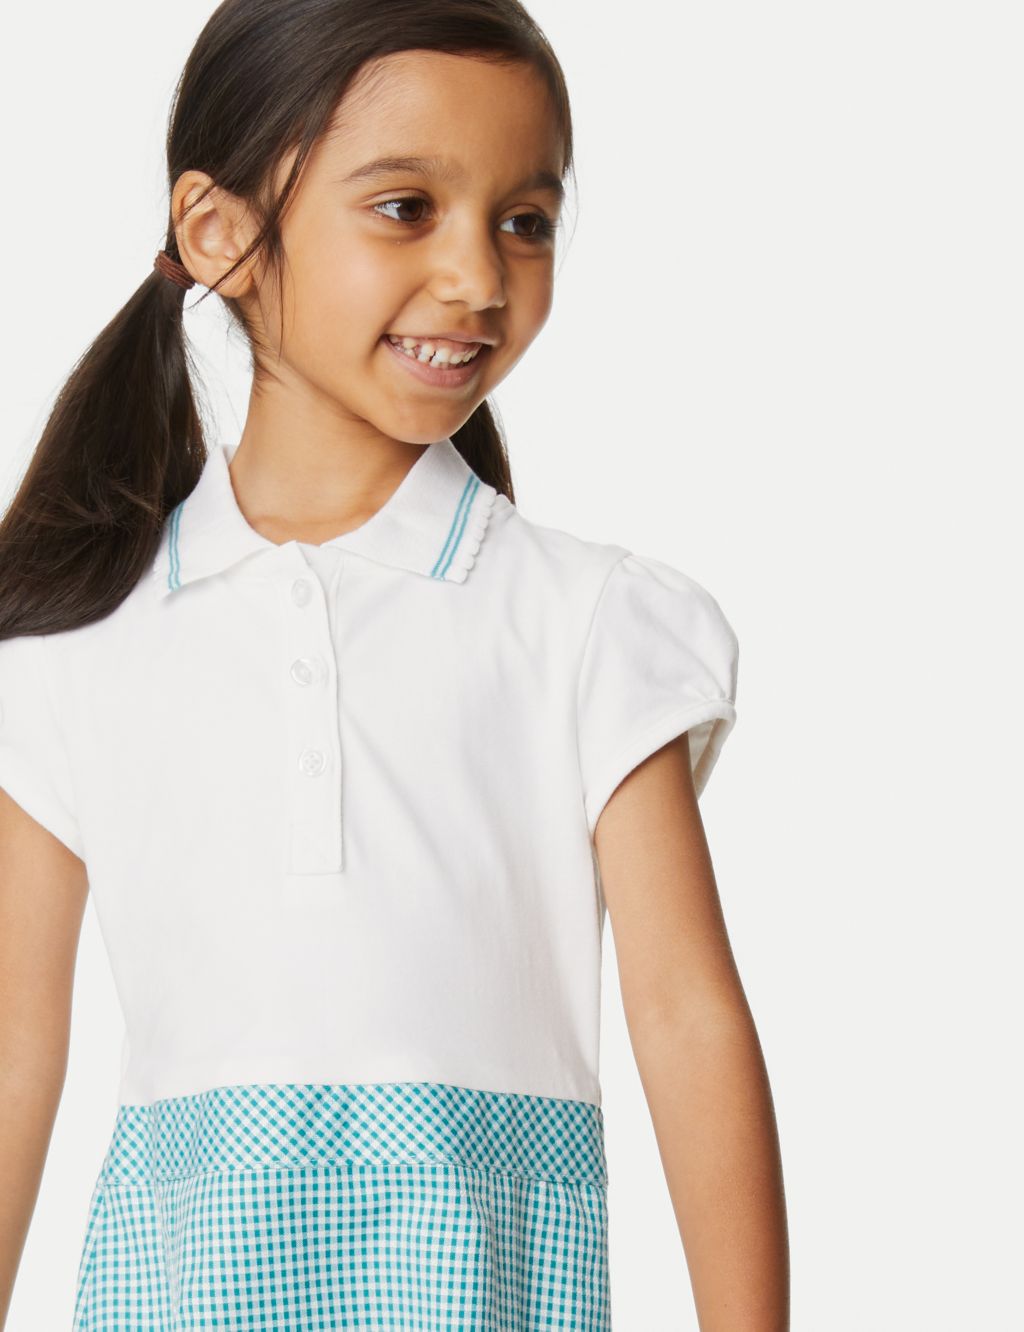 Girls' 2 in 1 Gingham Pleated School Dress (2-14 Yrs) image 3